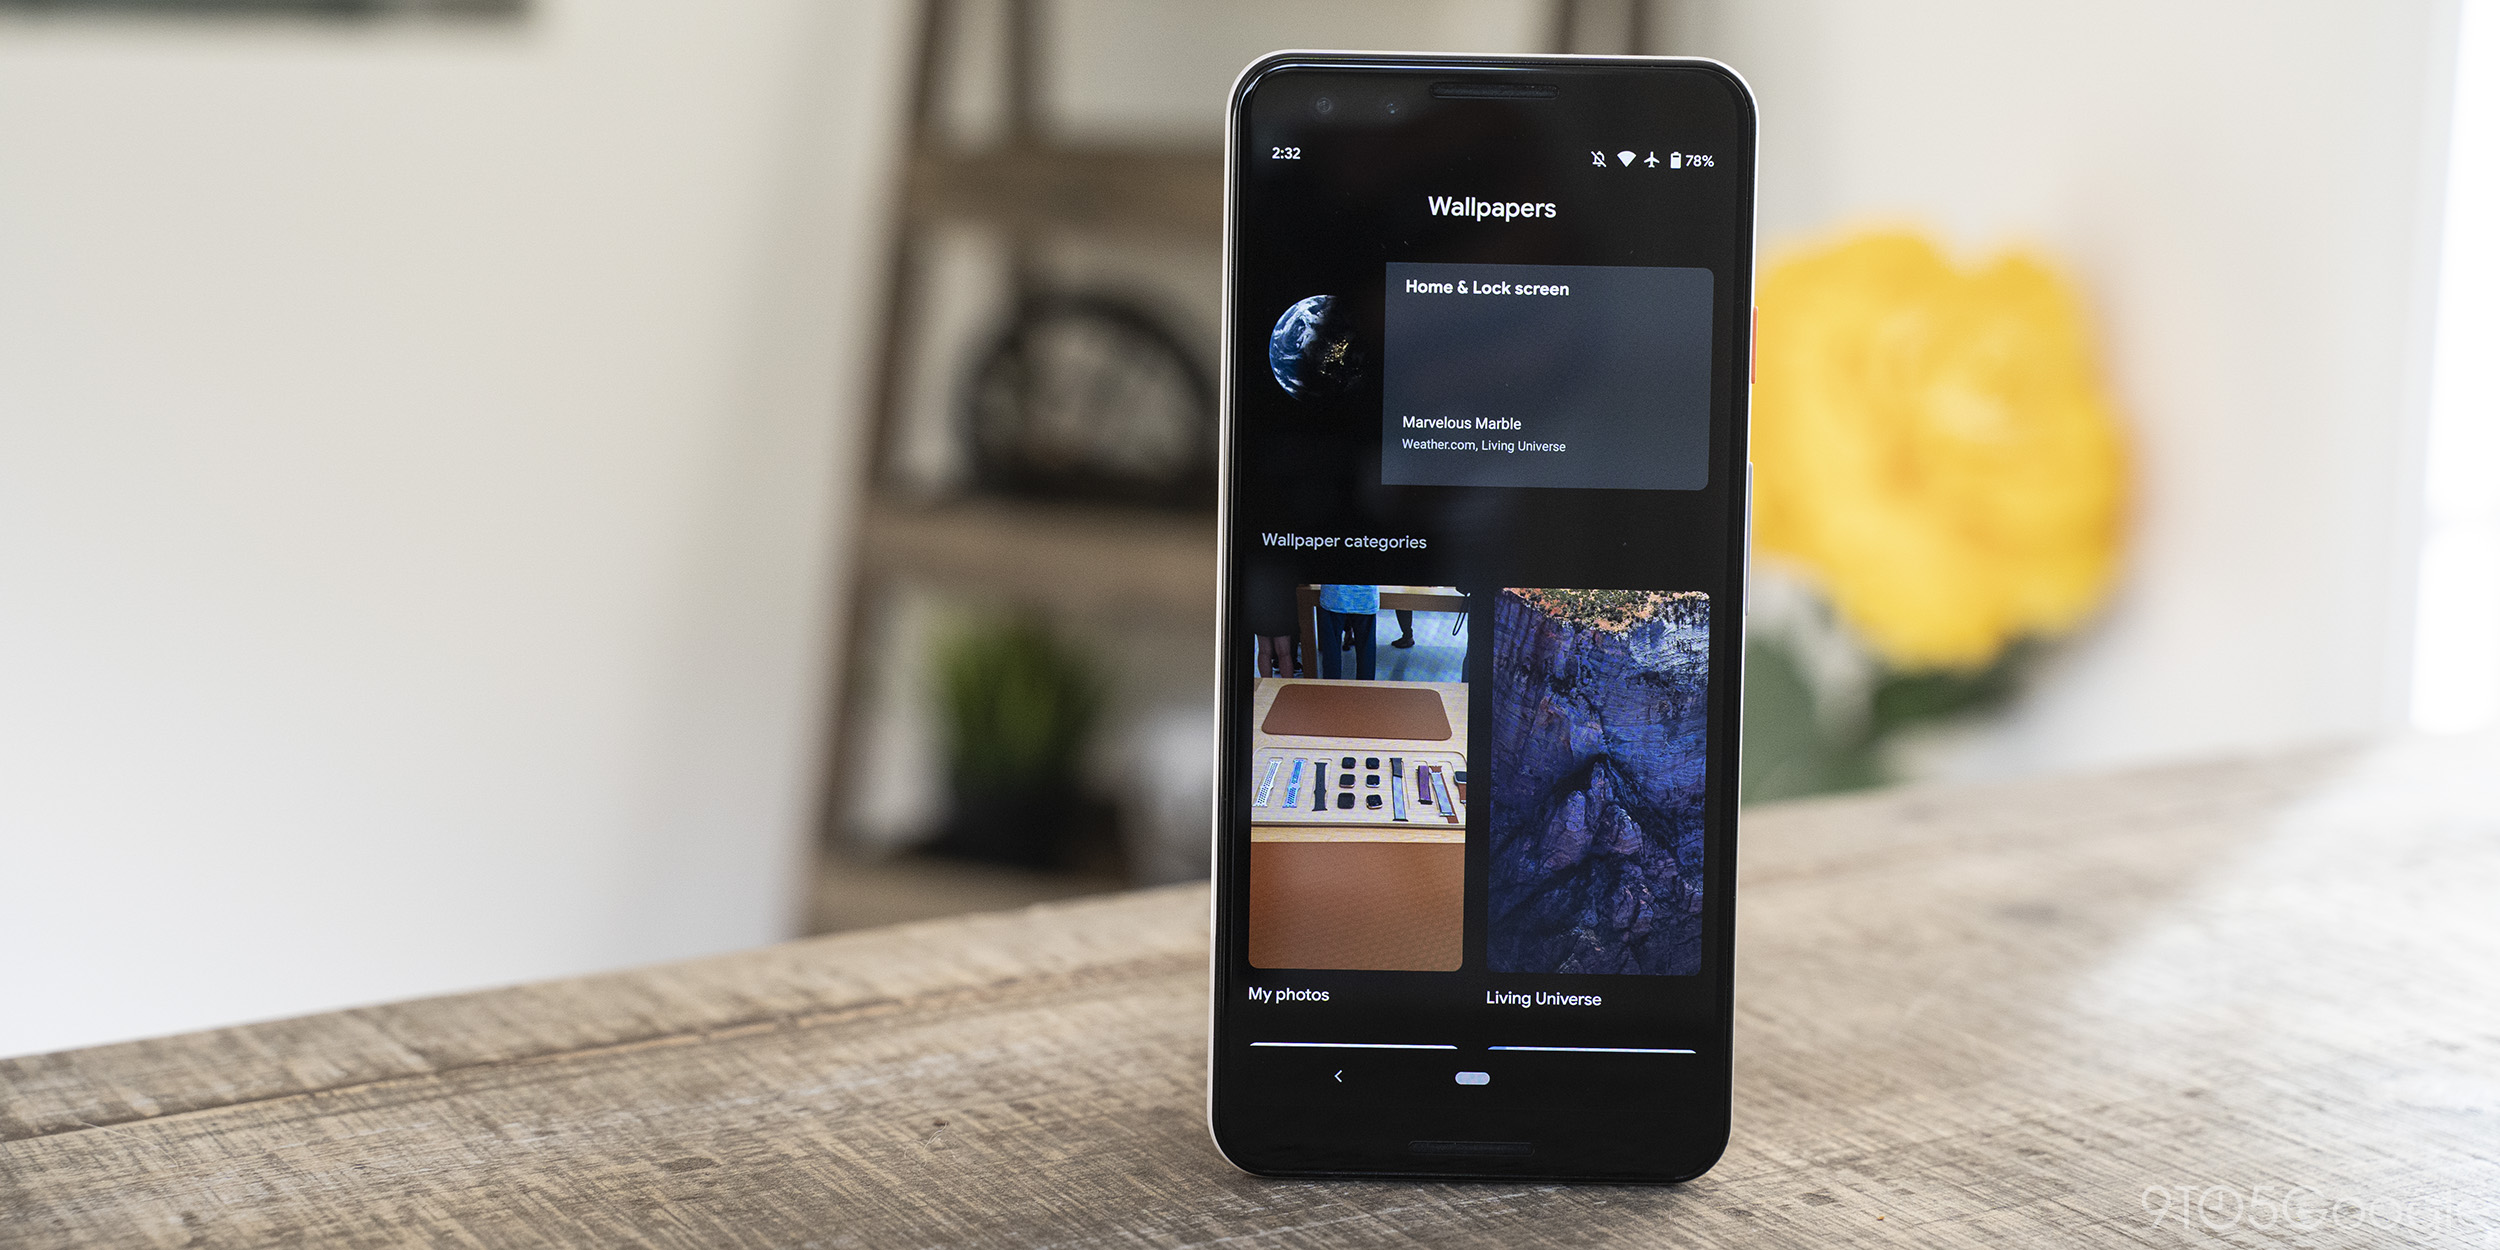 Download Google Wallpapers from the Pixel 4 - 9to5Google